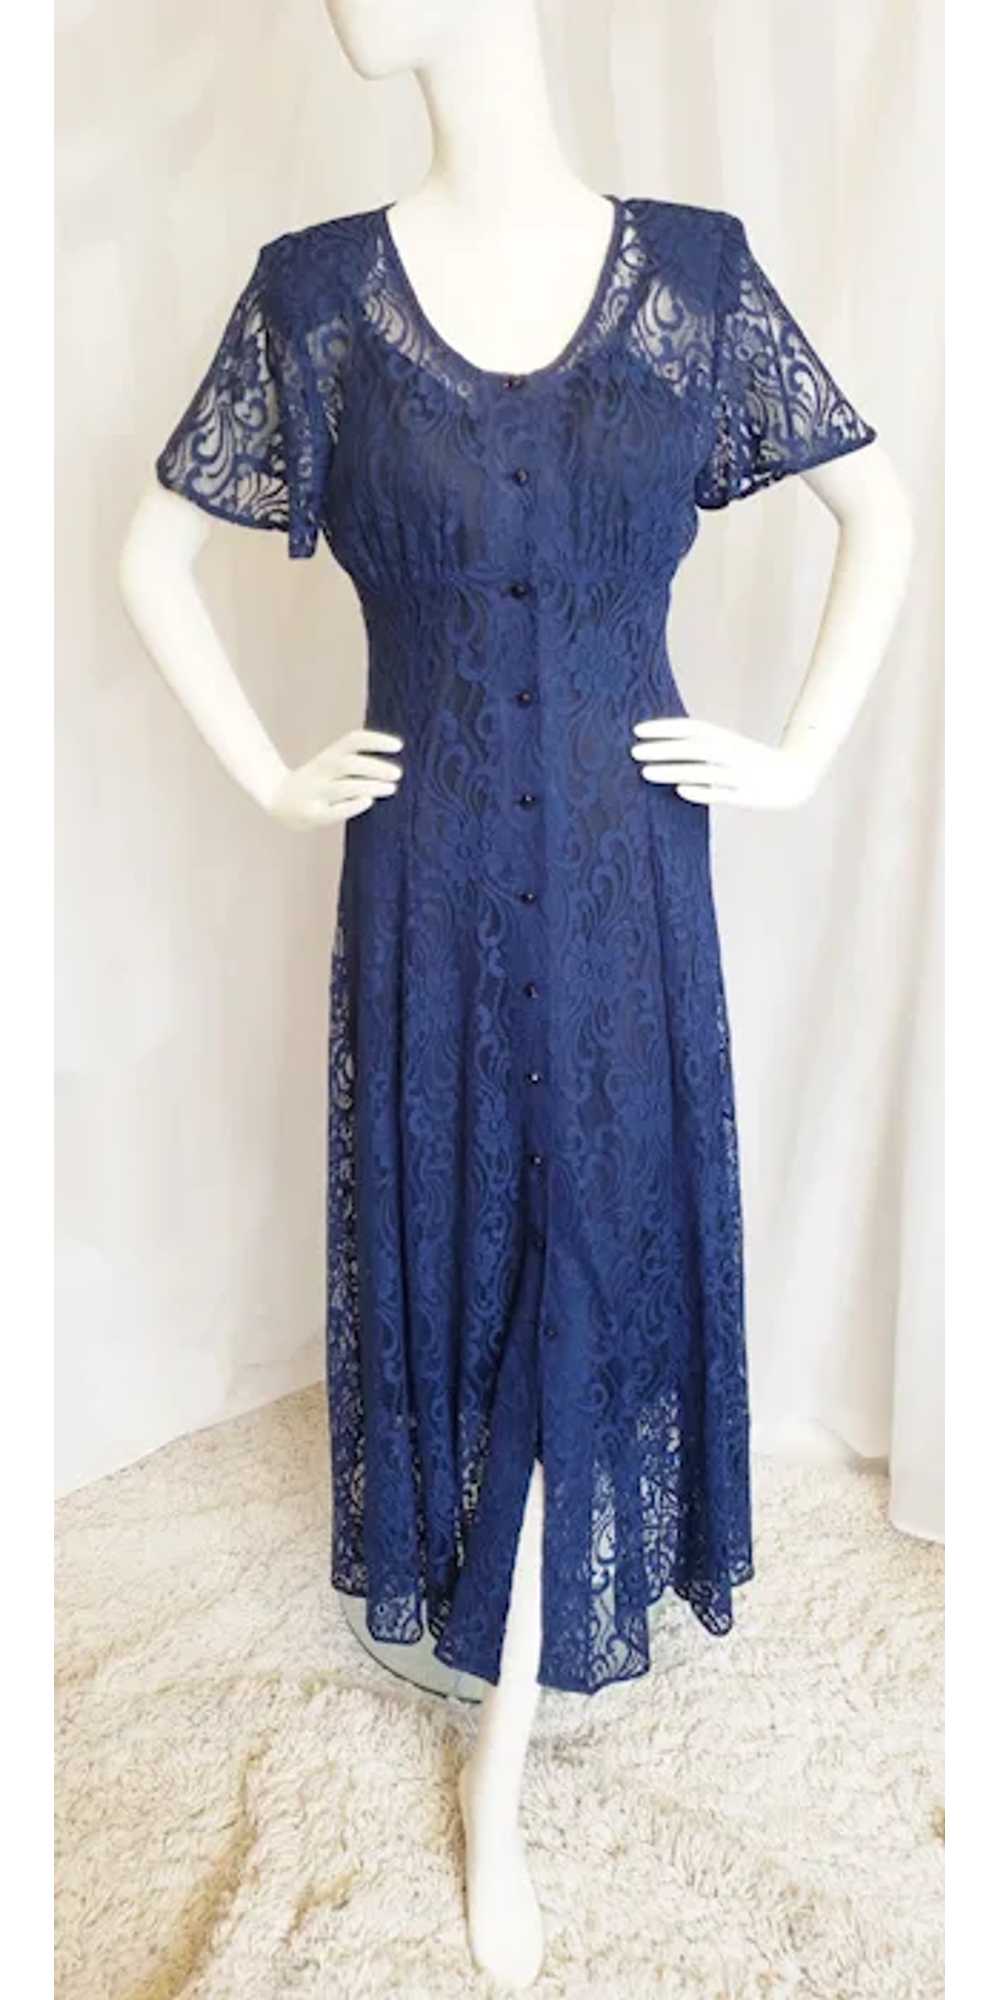 Romantic Lovely Lace Maxi Dress - image 5